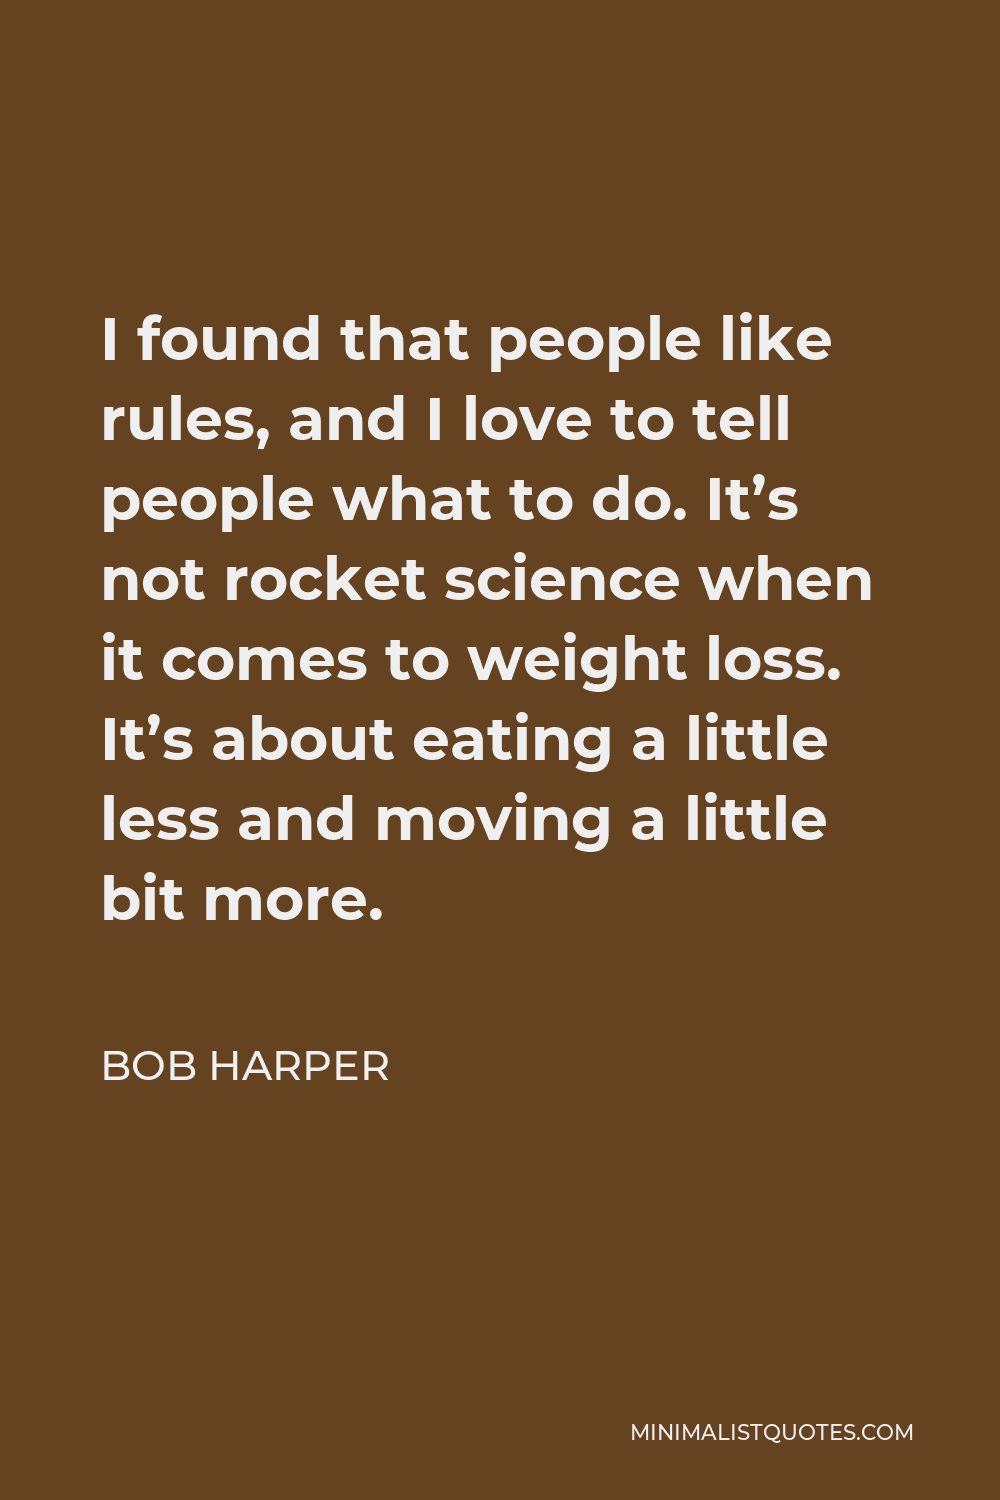 Bob Harper Quote - I found that people like rules, and I love to tell people what to do. It’s not rocket science when it comes to weight loss. It’s about eating a little less and moving a little bit more.